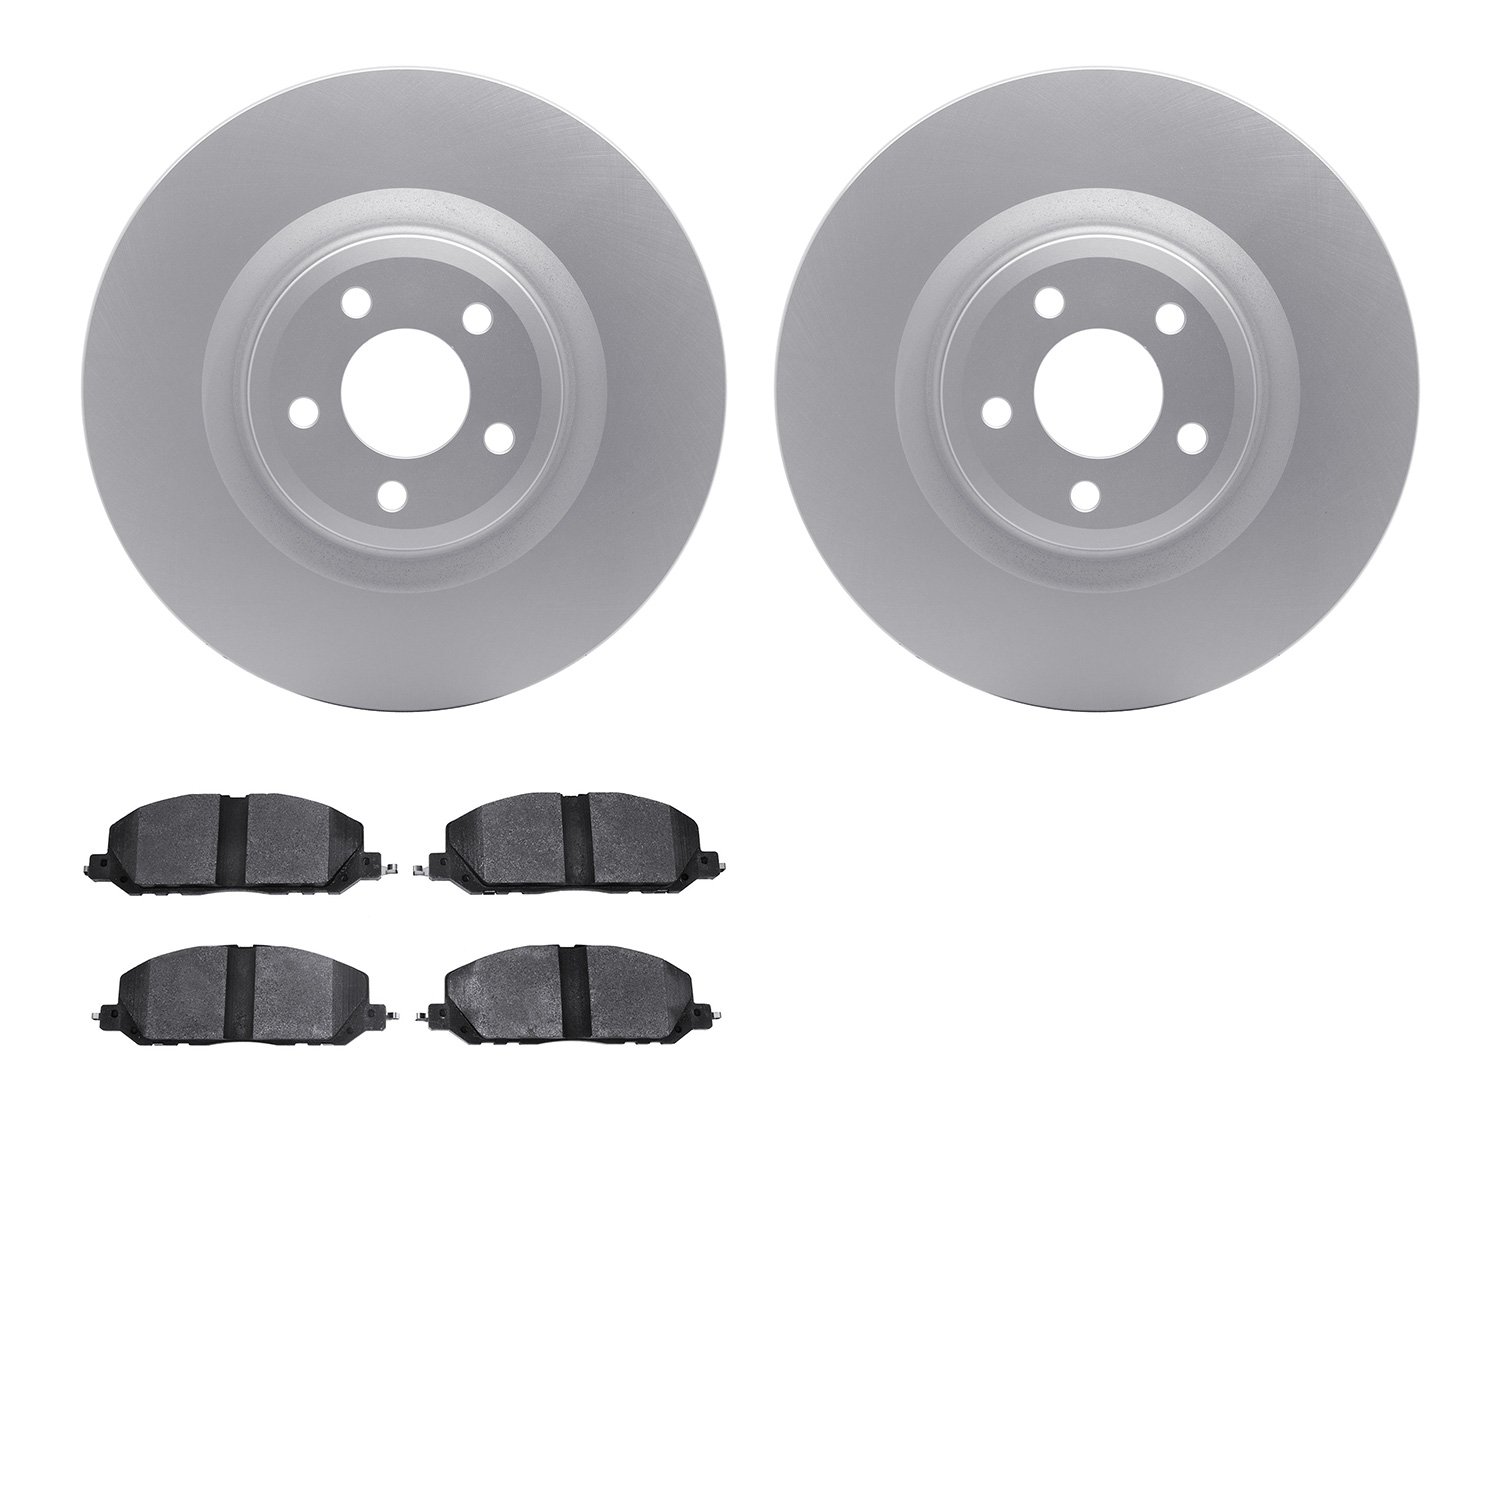 4502-54246 Geospec Brake Rotors w/5000 Advanced Brake Pads Kit, Fits Select Ford/Lincoln/Mercury/Mazda, Position: Front